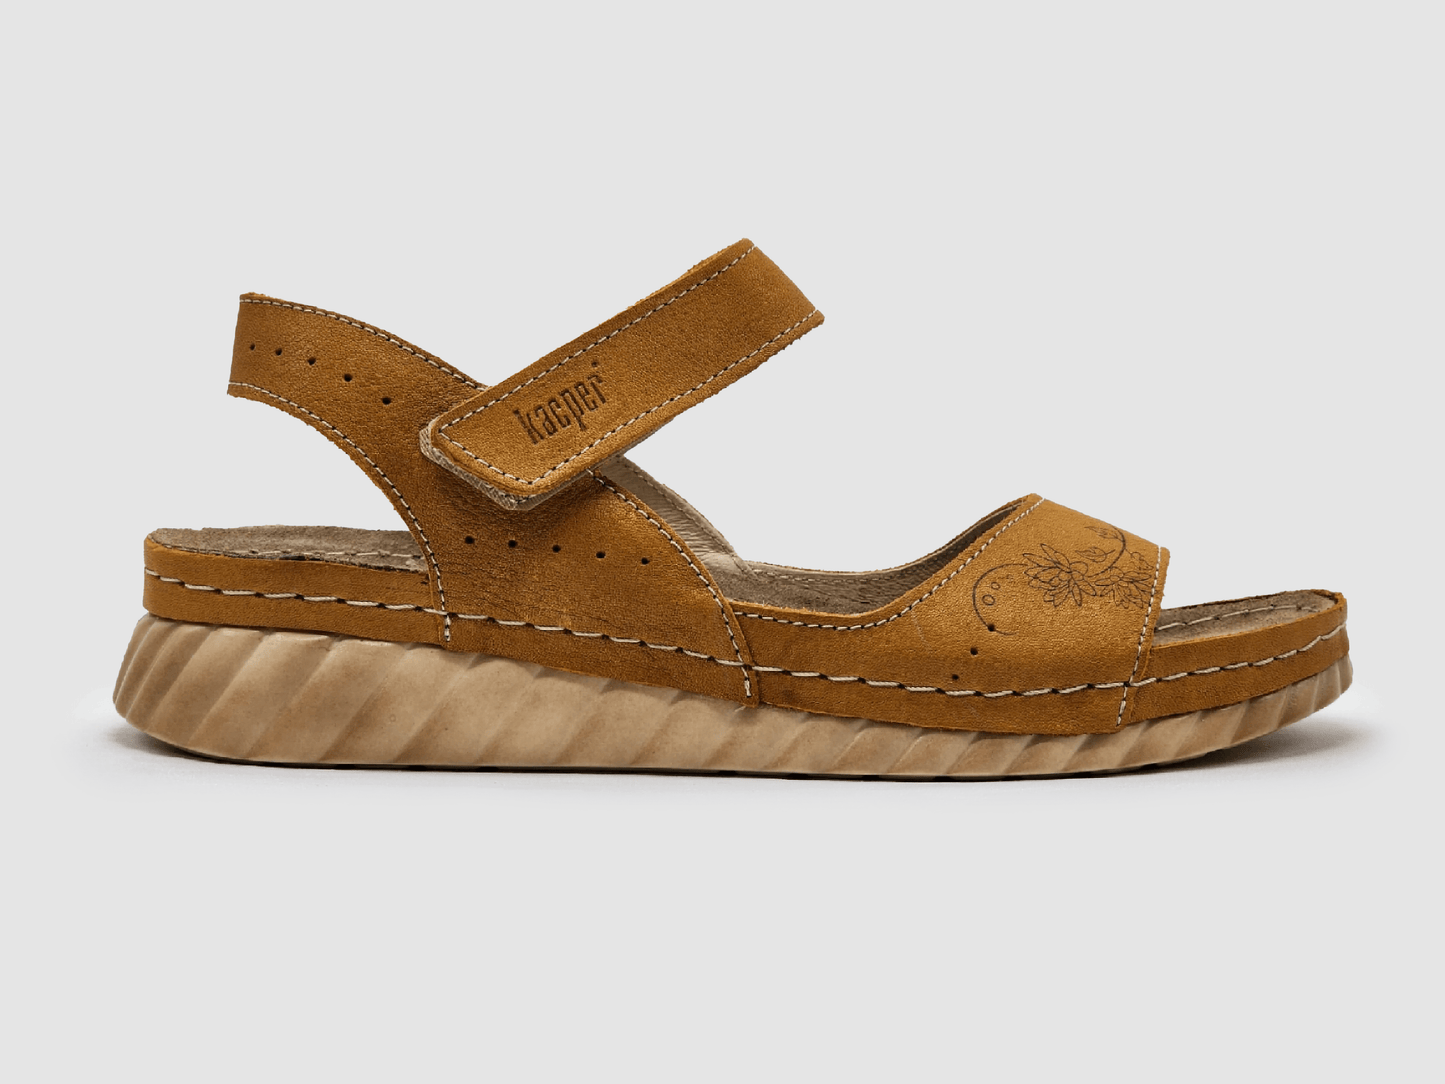 Women's Leather Sandals - Yellow - Kacper Global Shoes 